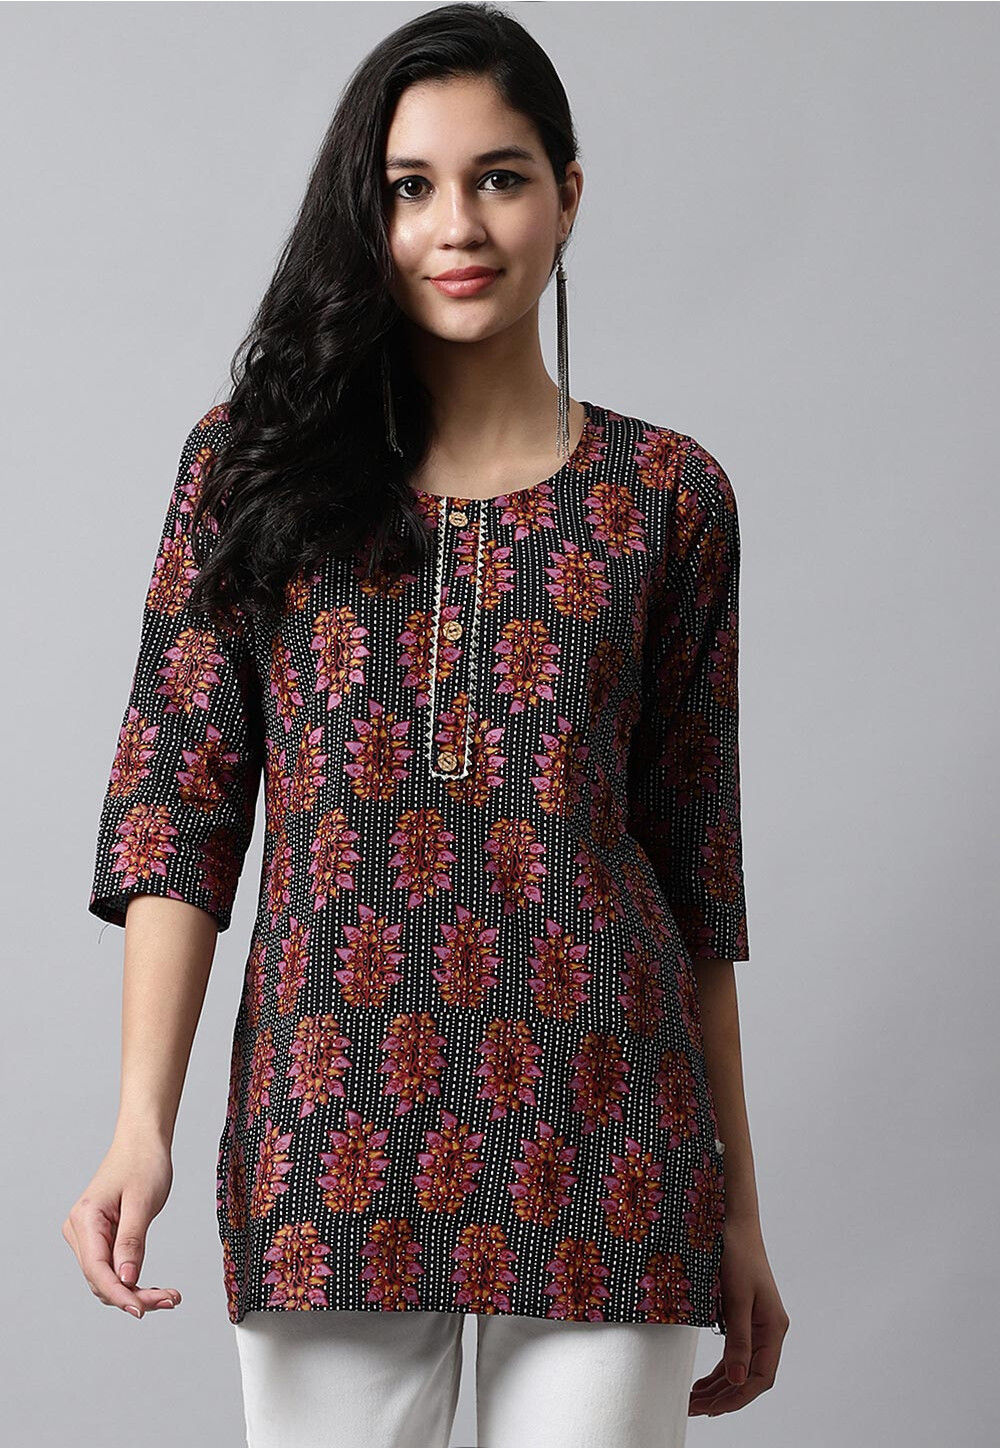 Beautiful 3/4 Sleeve Cotton Printed Casual Short Kurti For Girls Bust Size:  36 Inch (in) at Best Price in Jaipur | Jakira Export International